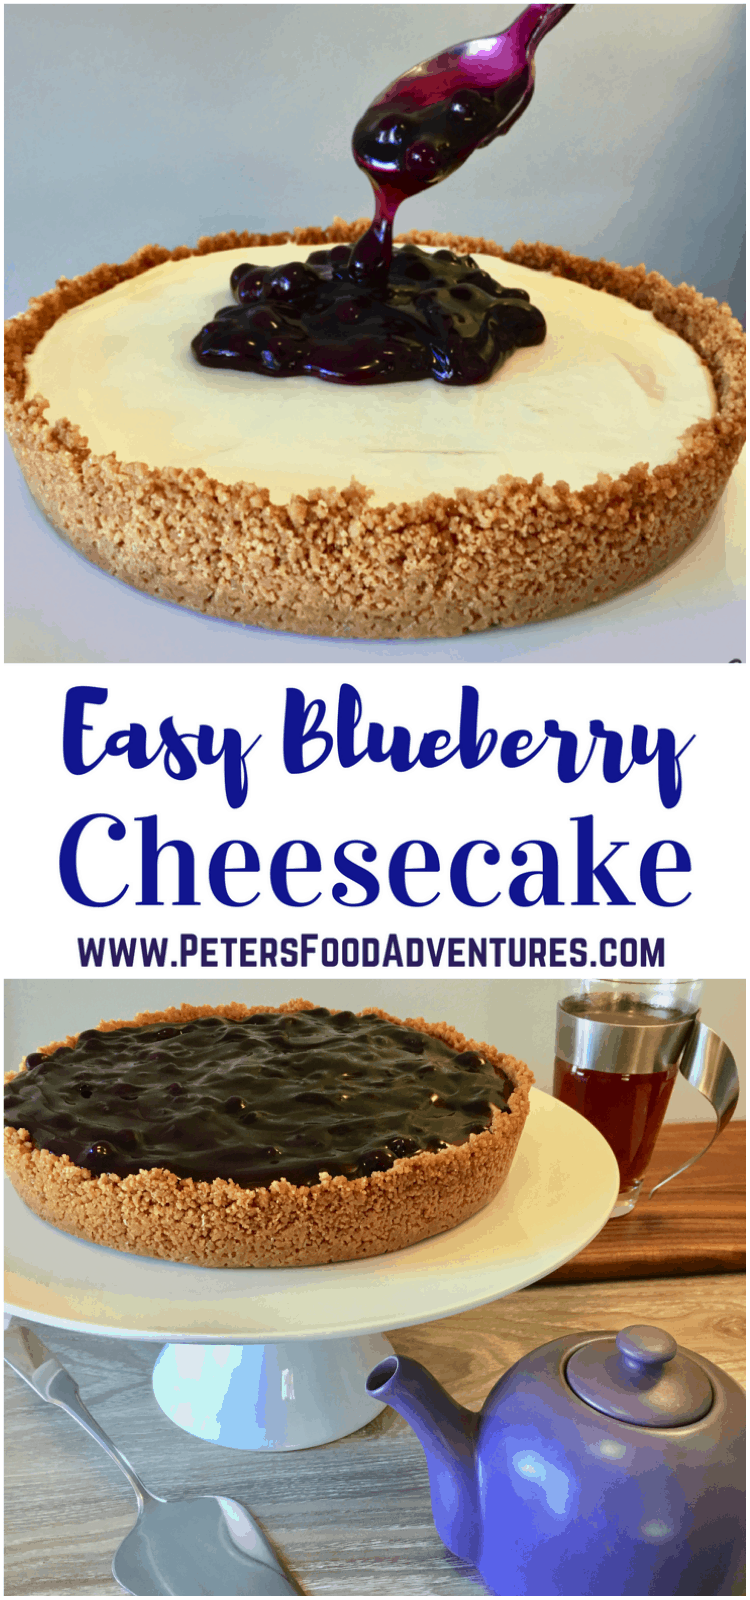 No Bake Blueberry Cheesecake on a plate